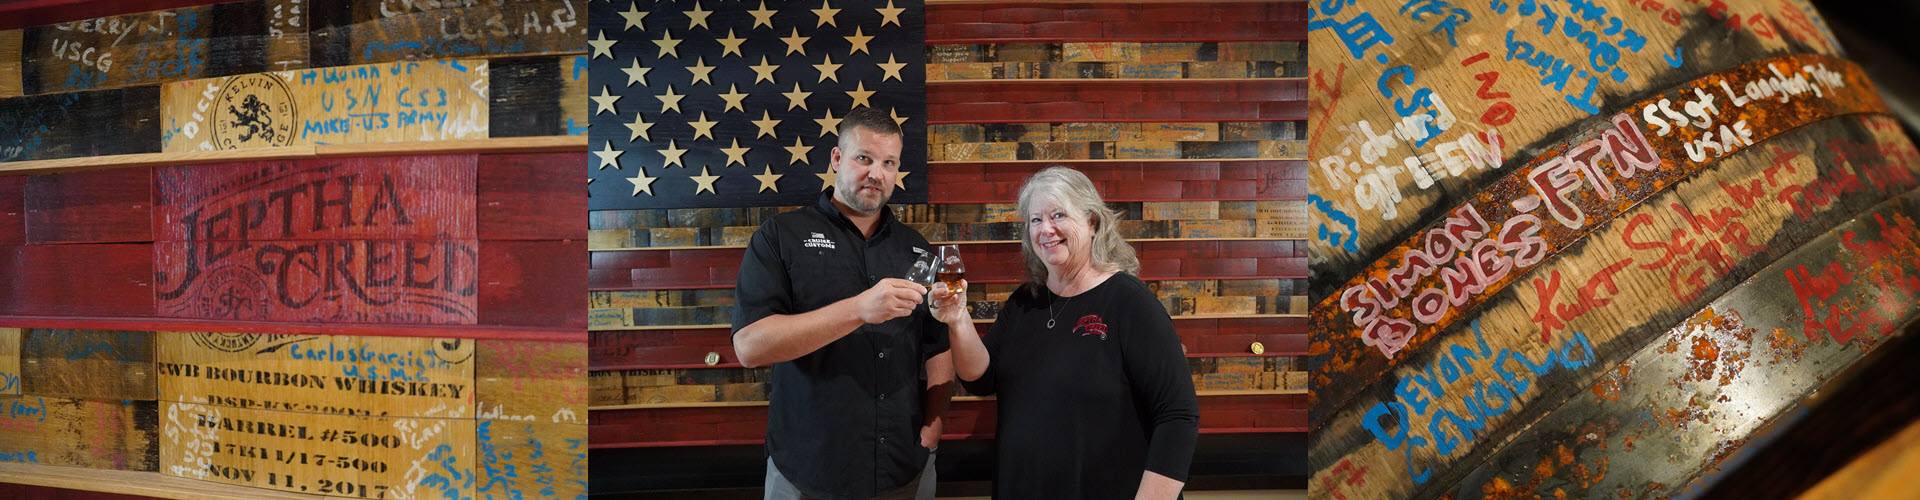 Jeptha Creed Distillery - National Bourbon Day and Flag Day, Release of a 12 foot x 7 foot American Flag Made of Bourbon Barrels